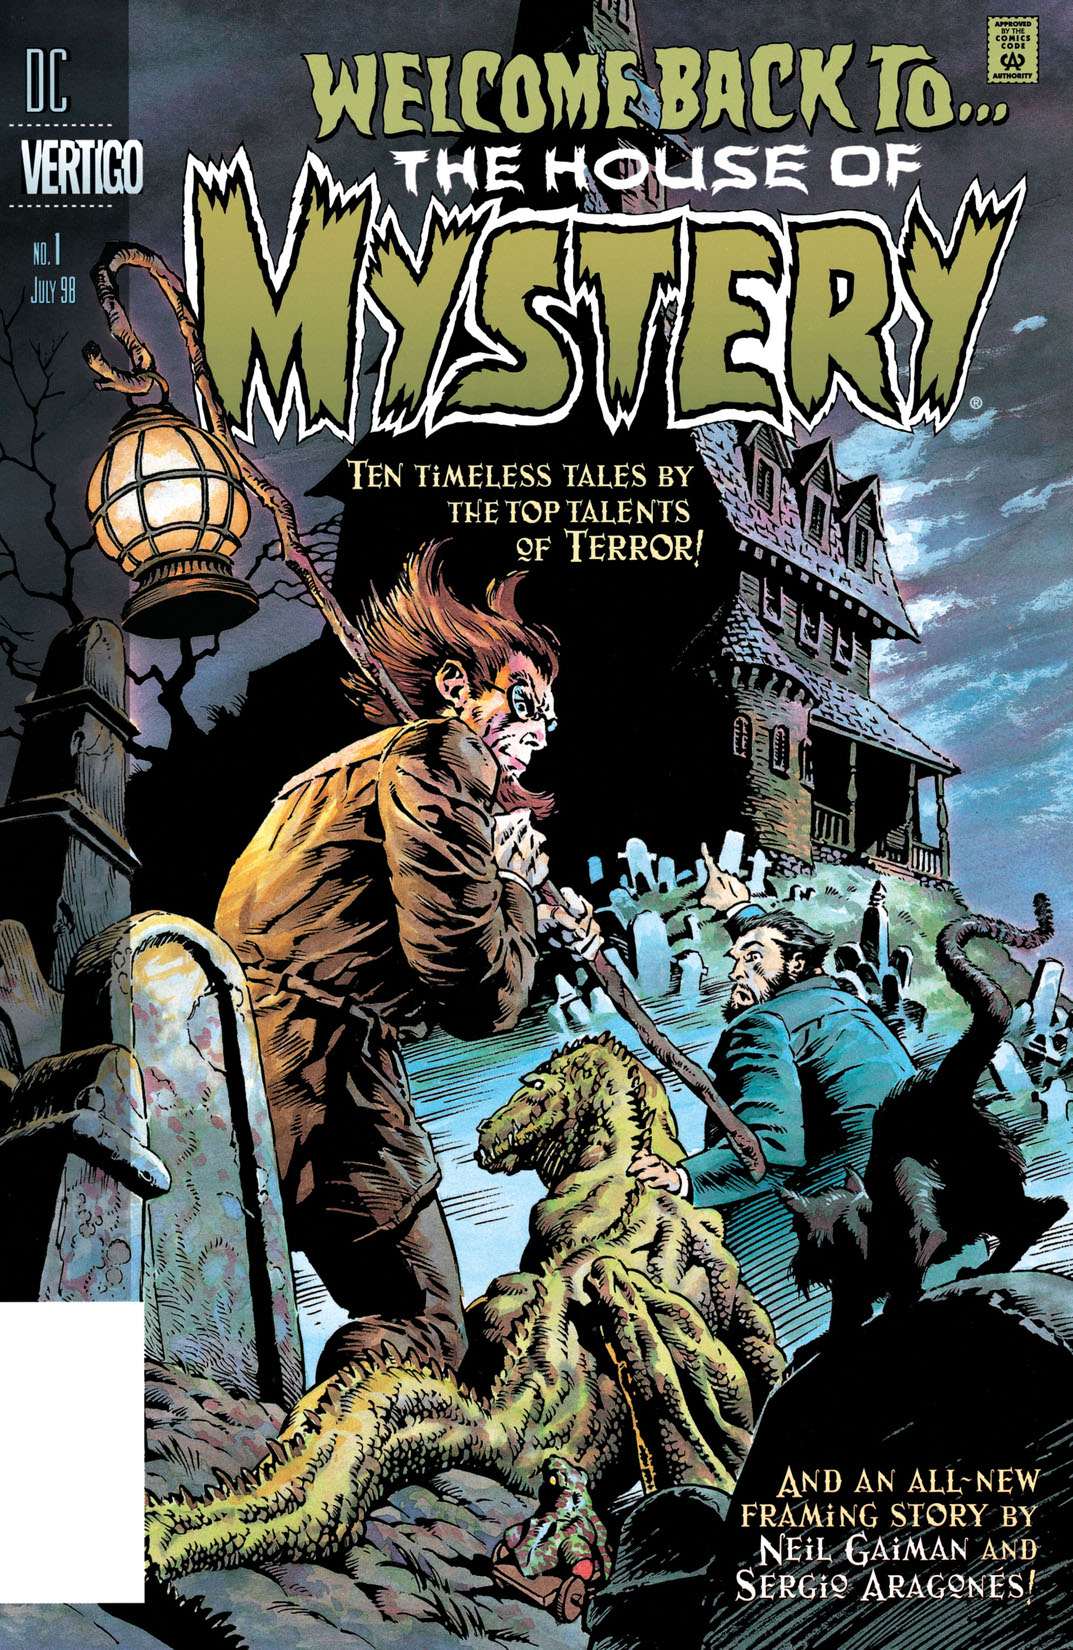 Welcome Back to the House of Mystery #1 preview images